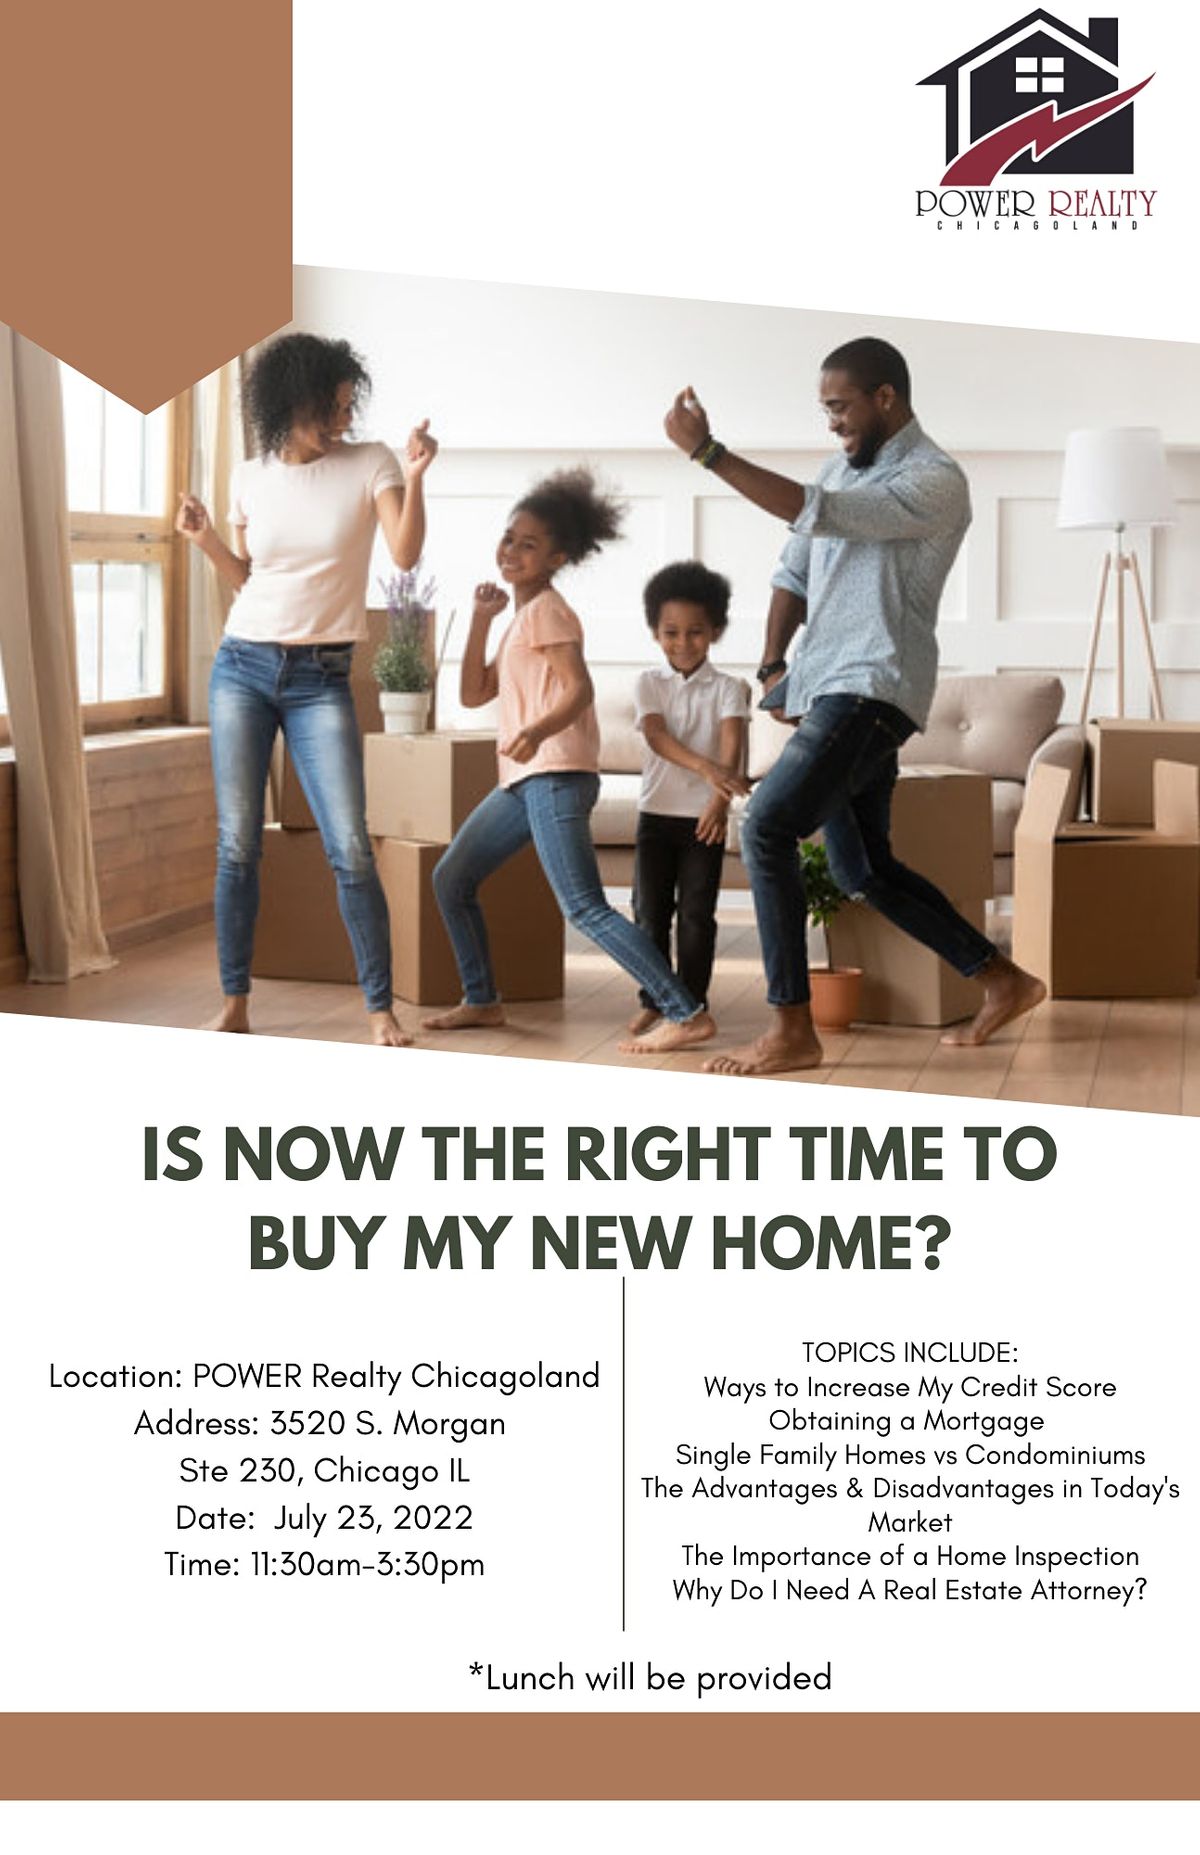 IS NOW THE TIME TO BUY MY NEW HOME? - Home Buyer's Seminar